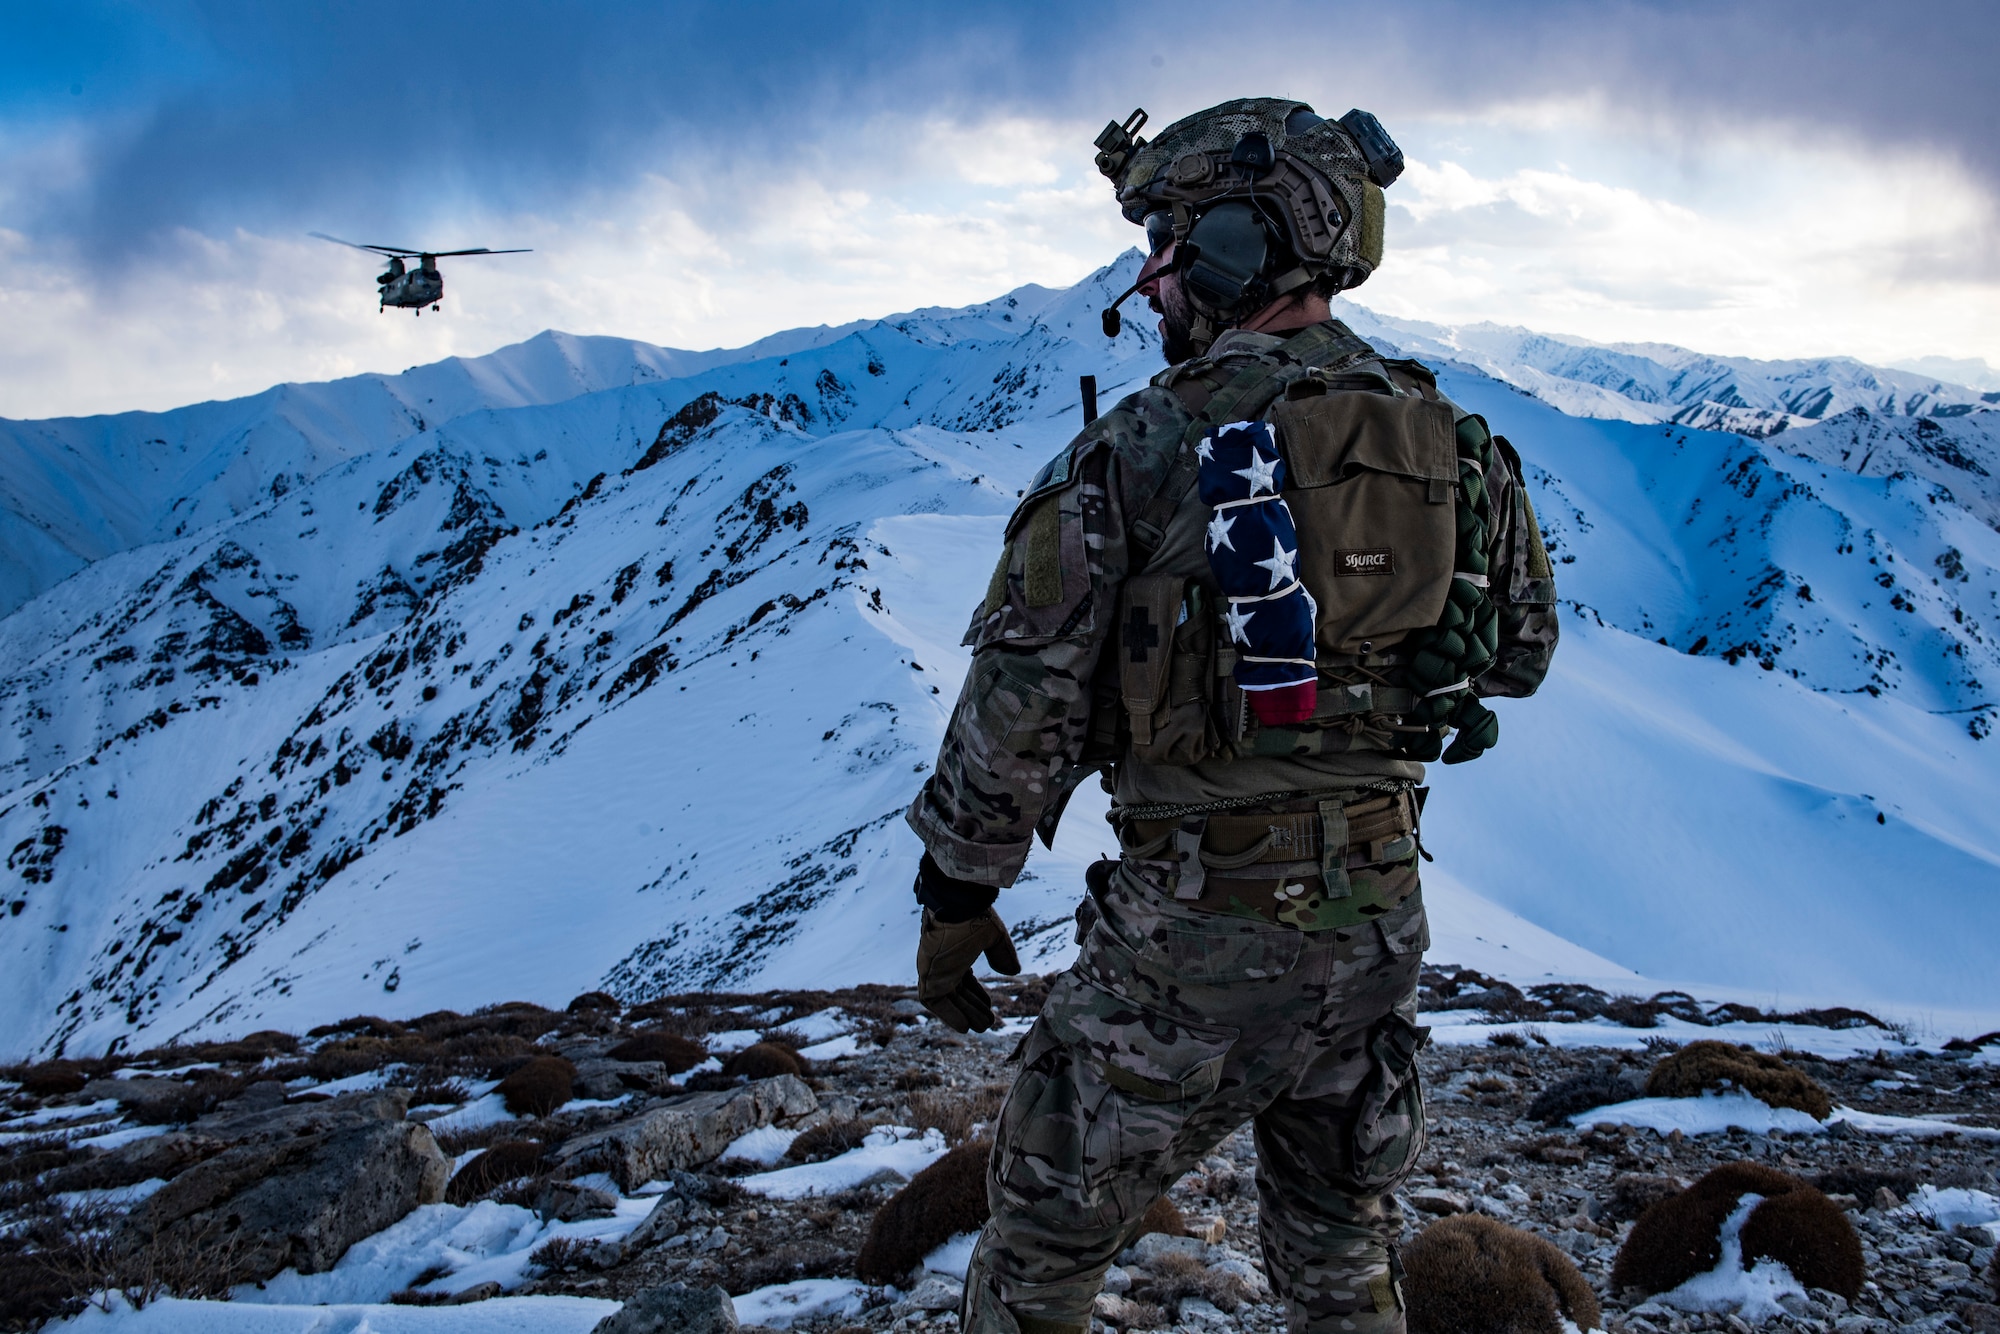 An Air Force pararescueman, assigned to the 83rd Expeditionary Rescue Squadron, communicates with an Army Task Force Brawler CH-47F Chinook during a training exercise at an undisclosed location in the mountains of Afghanistan, March 14, 2018. The Army crews and Air Force Guardian Angel teams conducted the exercise to build teamwork and procedures as they provide joint personnel recovery capability, aiding in the delivery of decisive airpower for U.S. Central Command. (U.S. Air Force photo by Tech. Sgt. Gregory Brook)